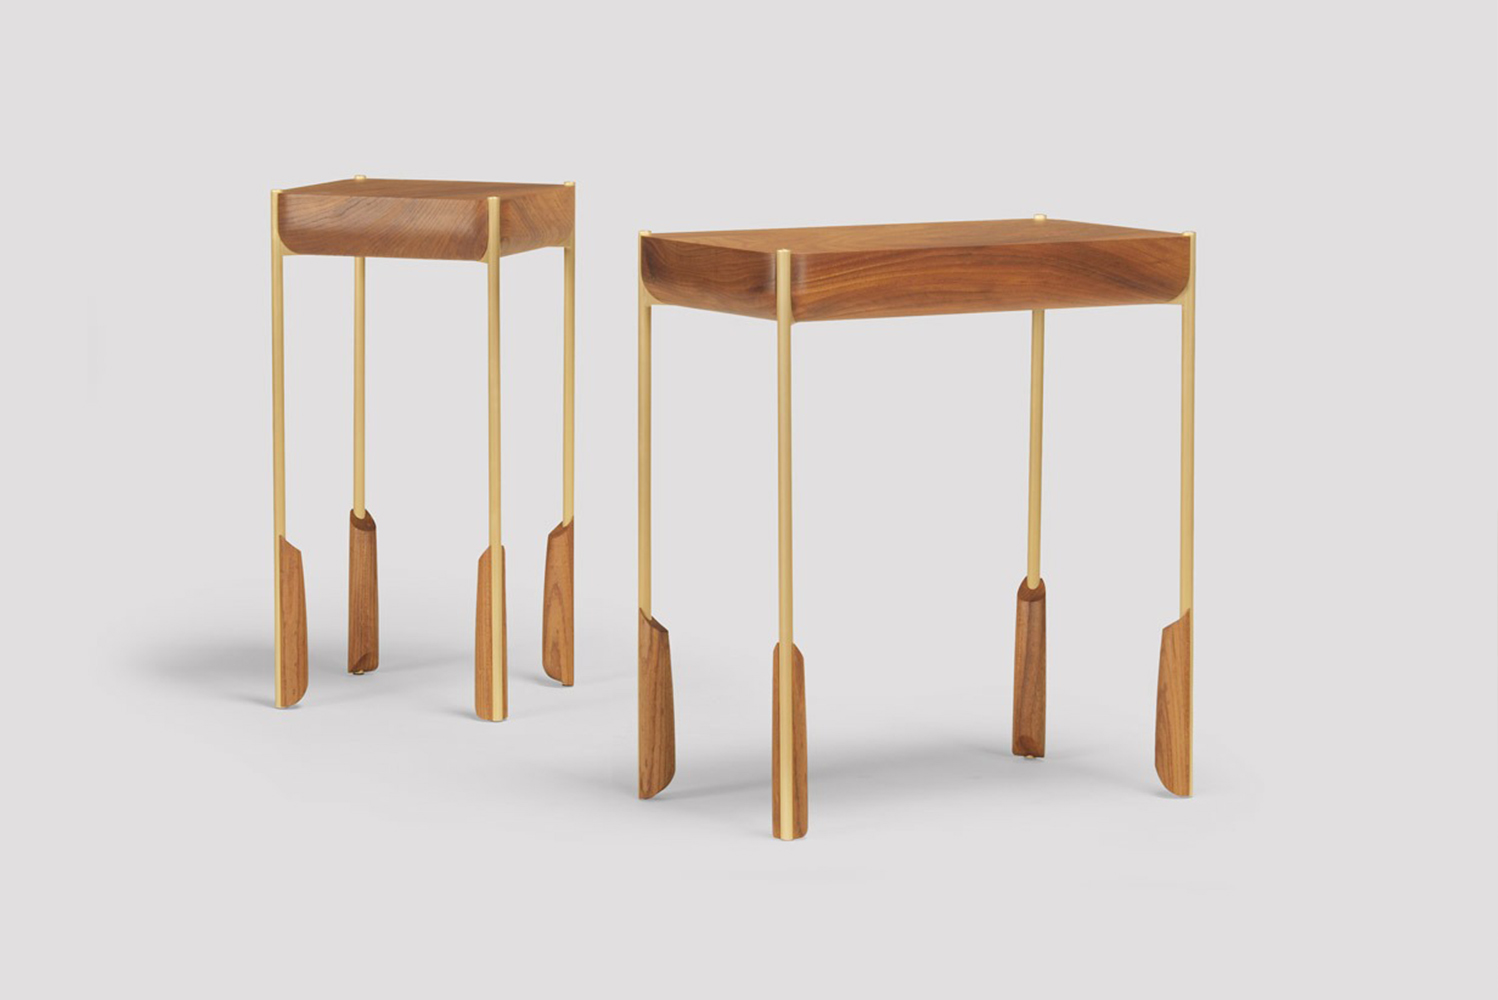 Introducing the Altai side tables from Skram Furniture 